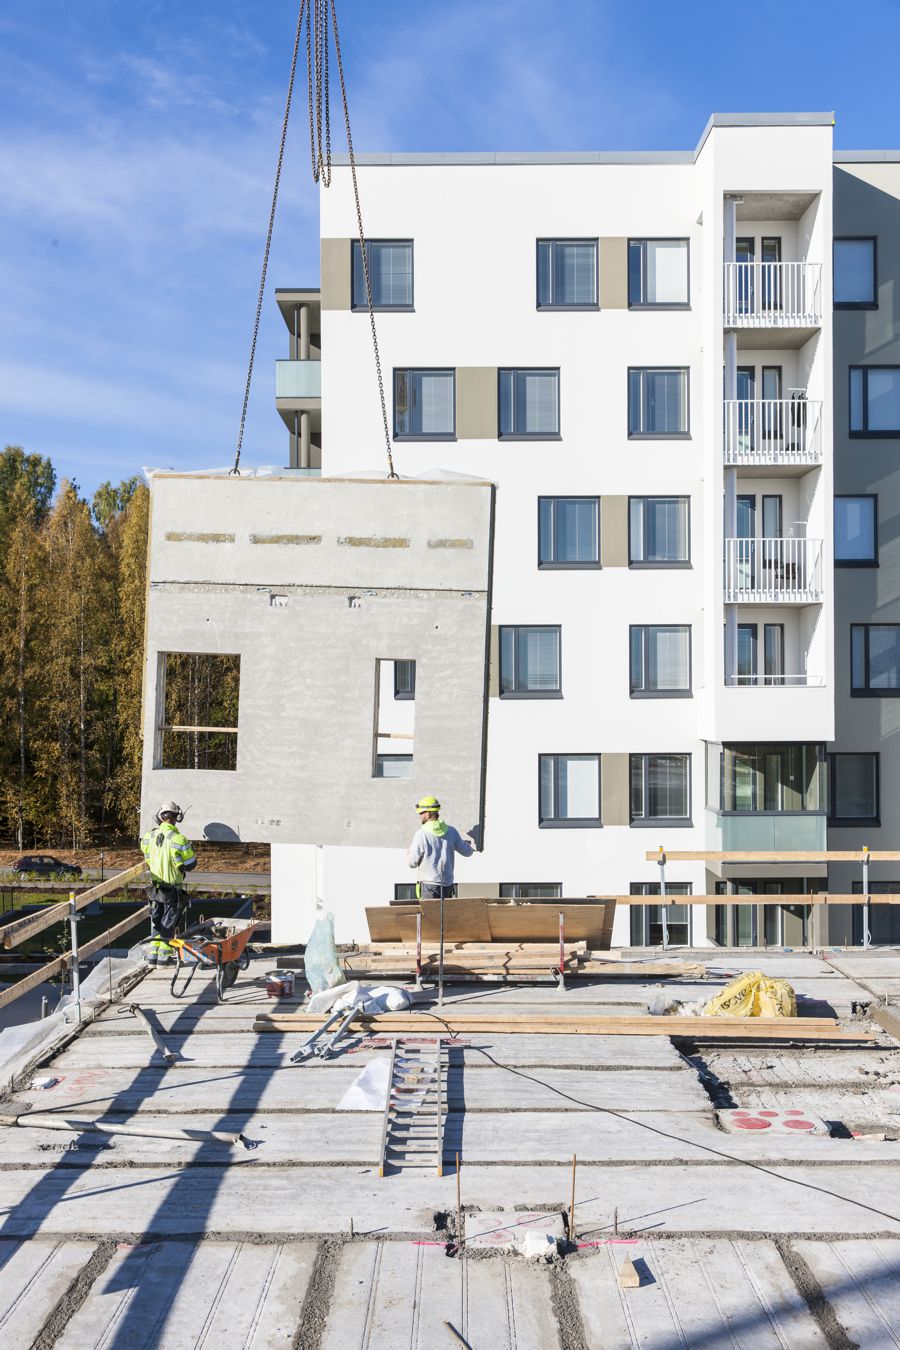 Precast Concrete is key to cutting Construction's Carbon Footprint